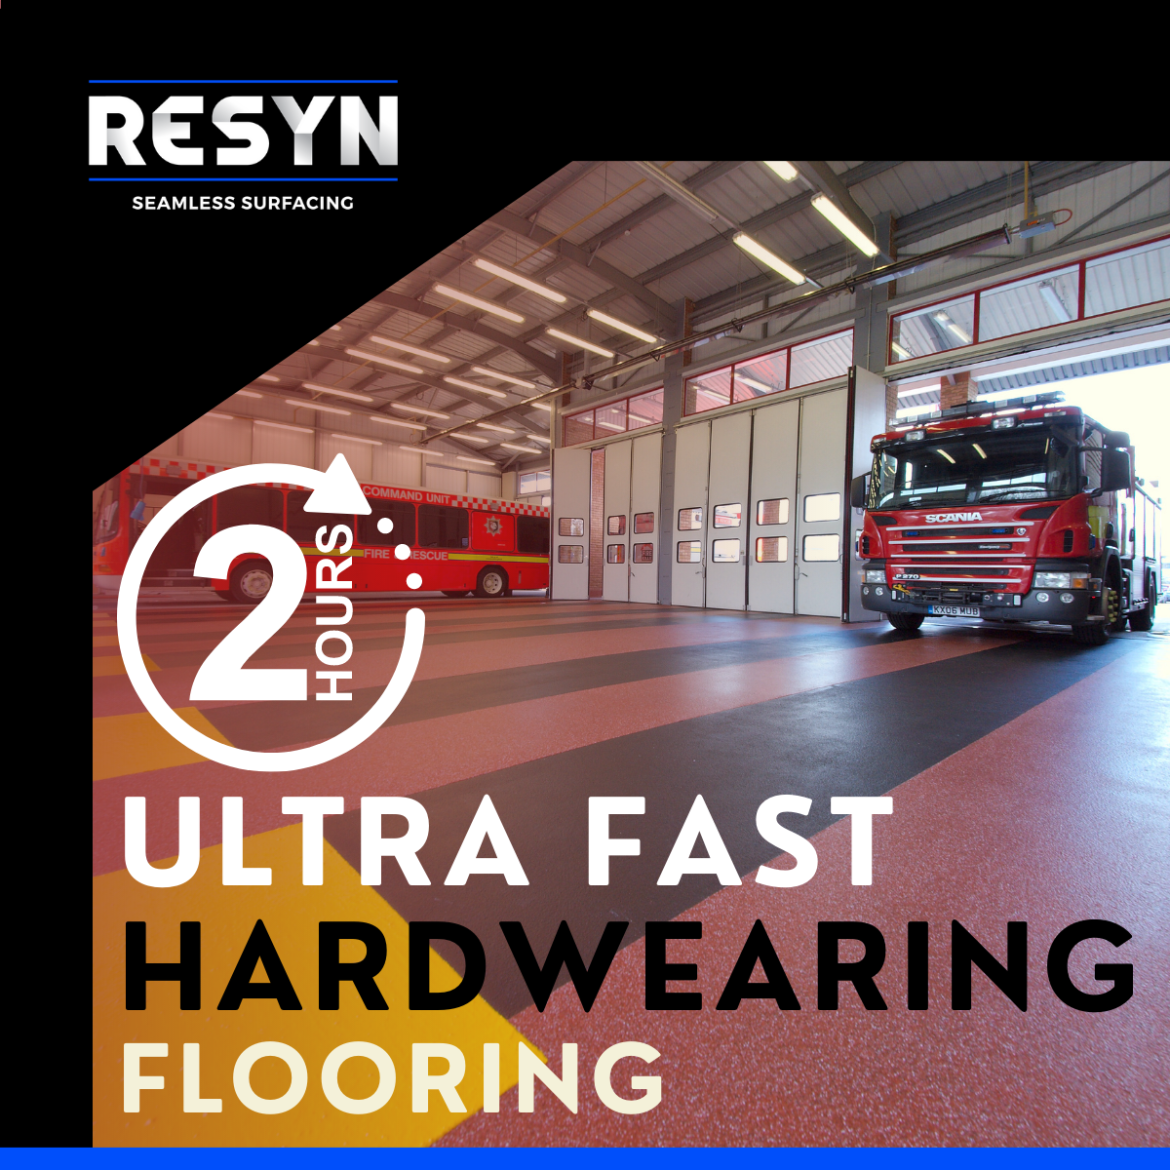 Hardwearing flooring packages supplied and installed by RESYN- emergency surfaces flooring. Hardwearing flooring packages supplied and installed by RESYN